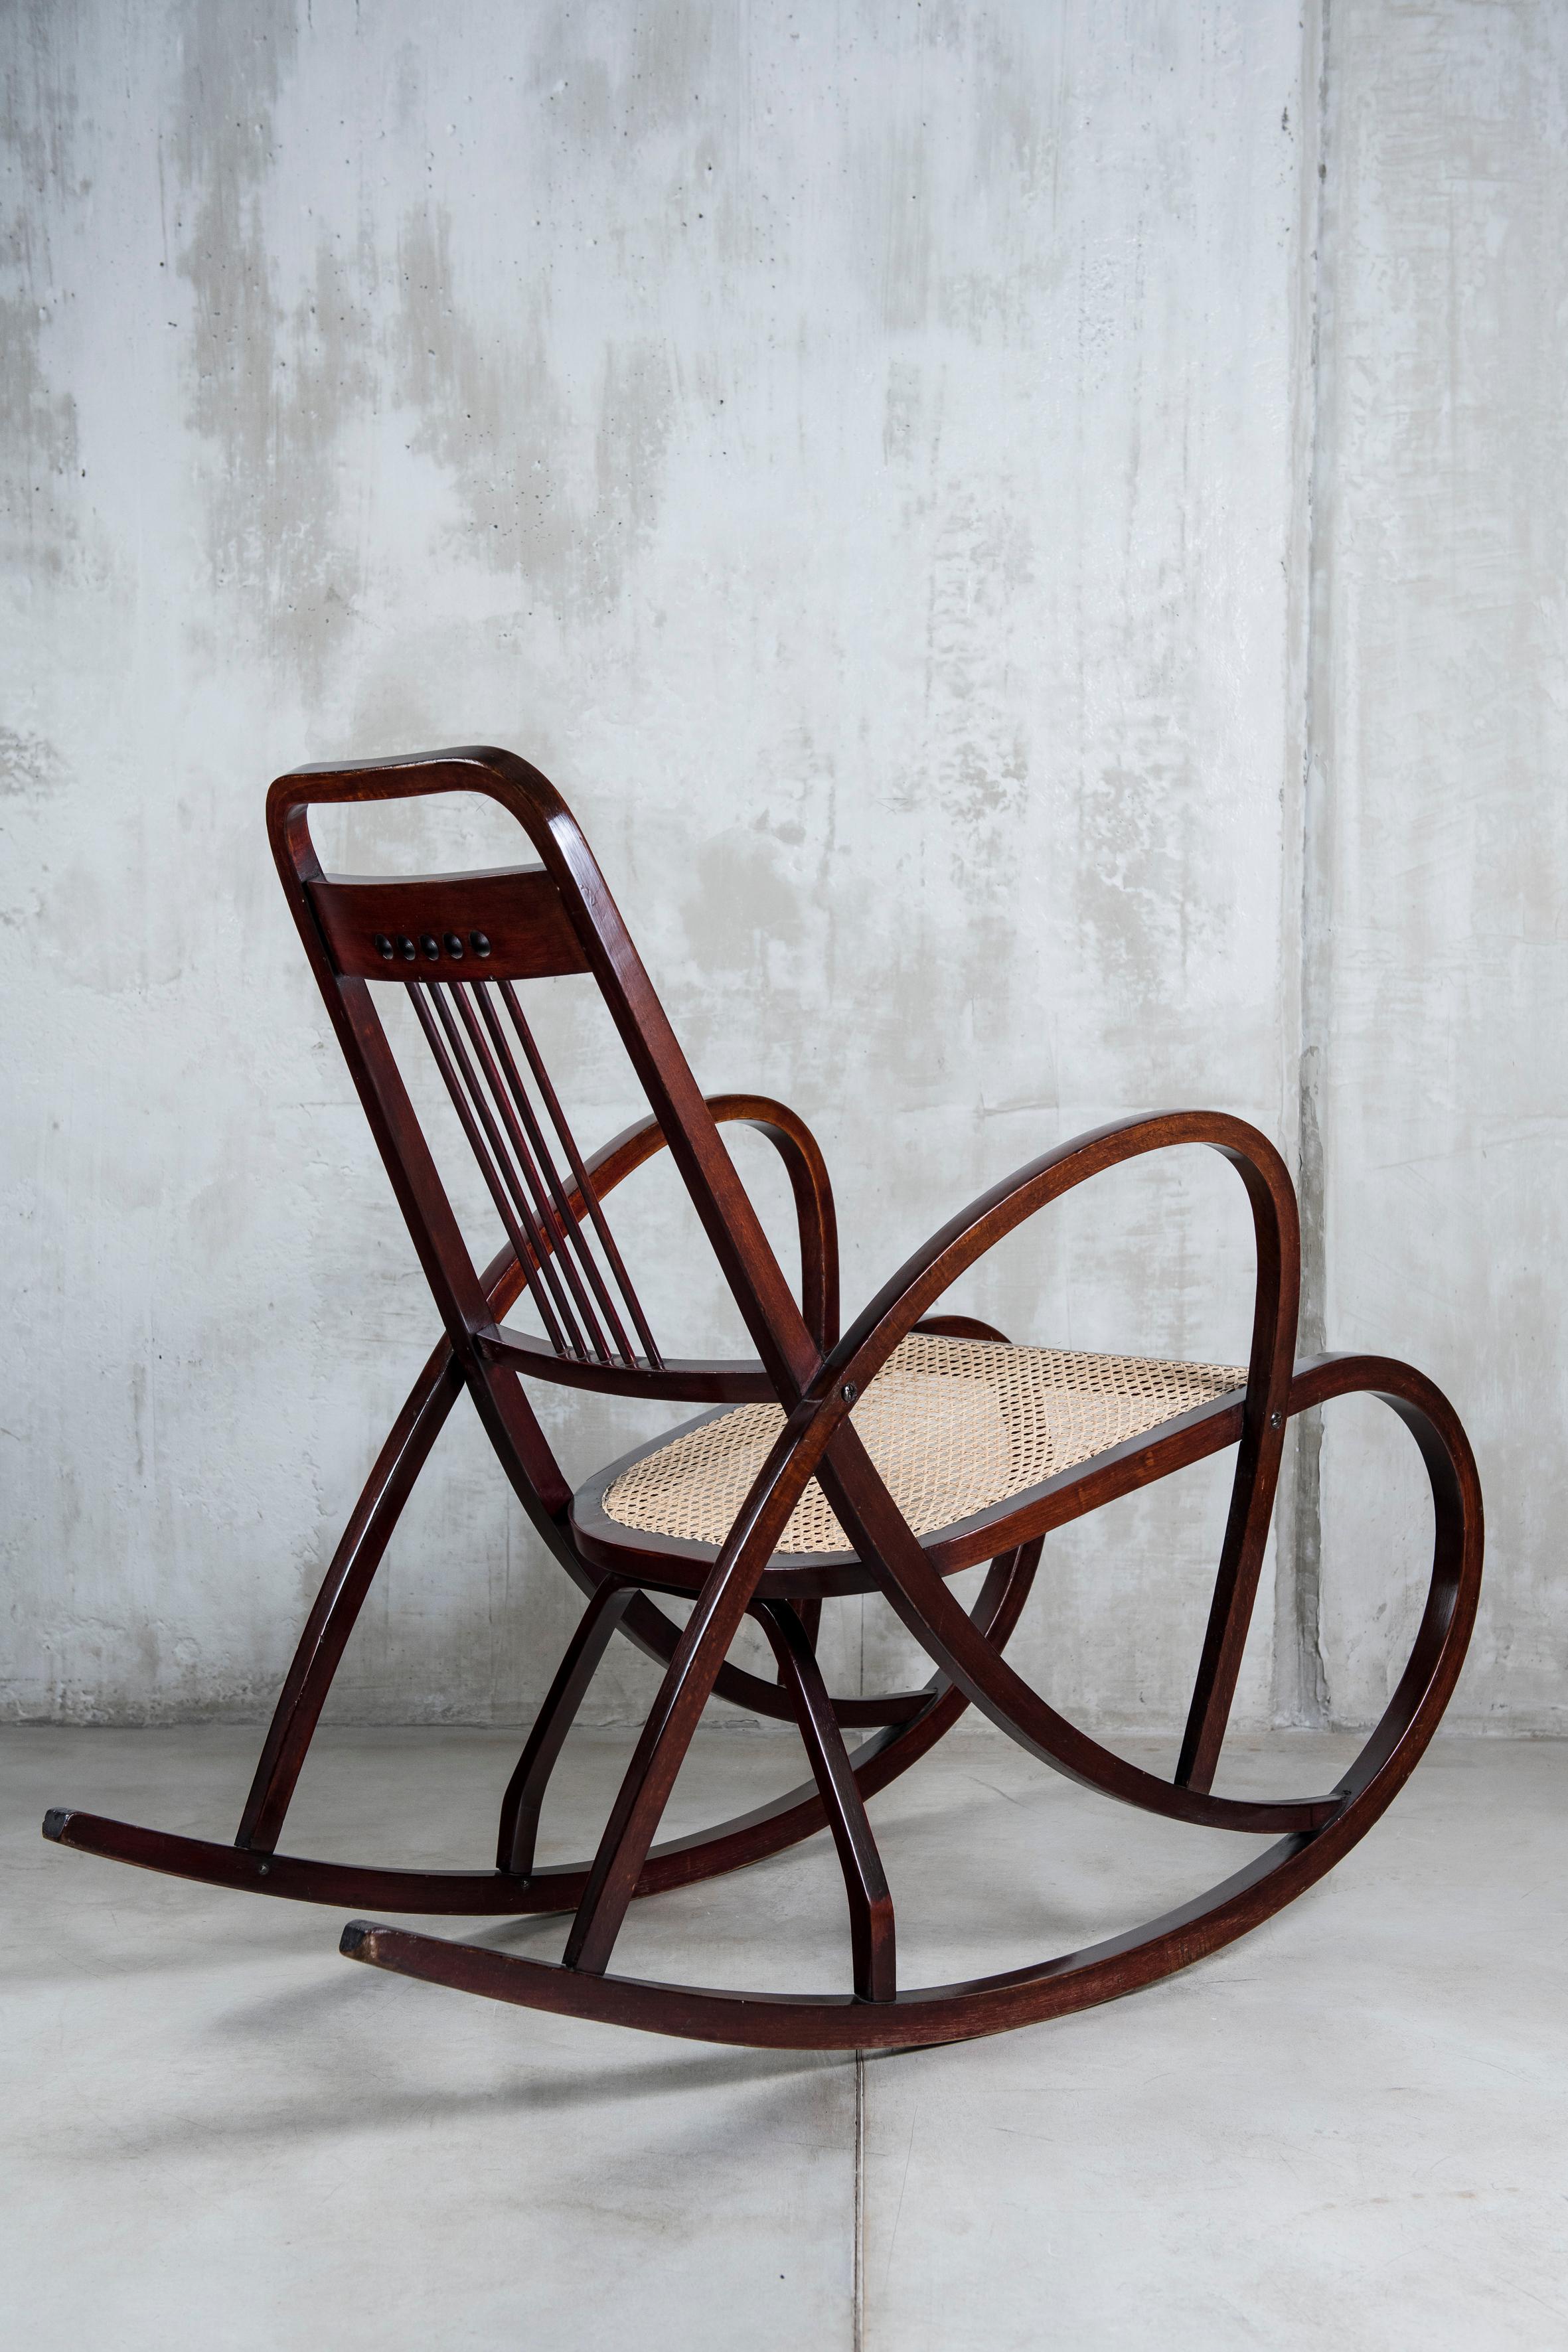 Thonet rocking chair, model number 511. Vienna Secession, circa 1904.